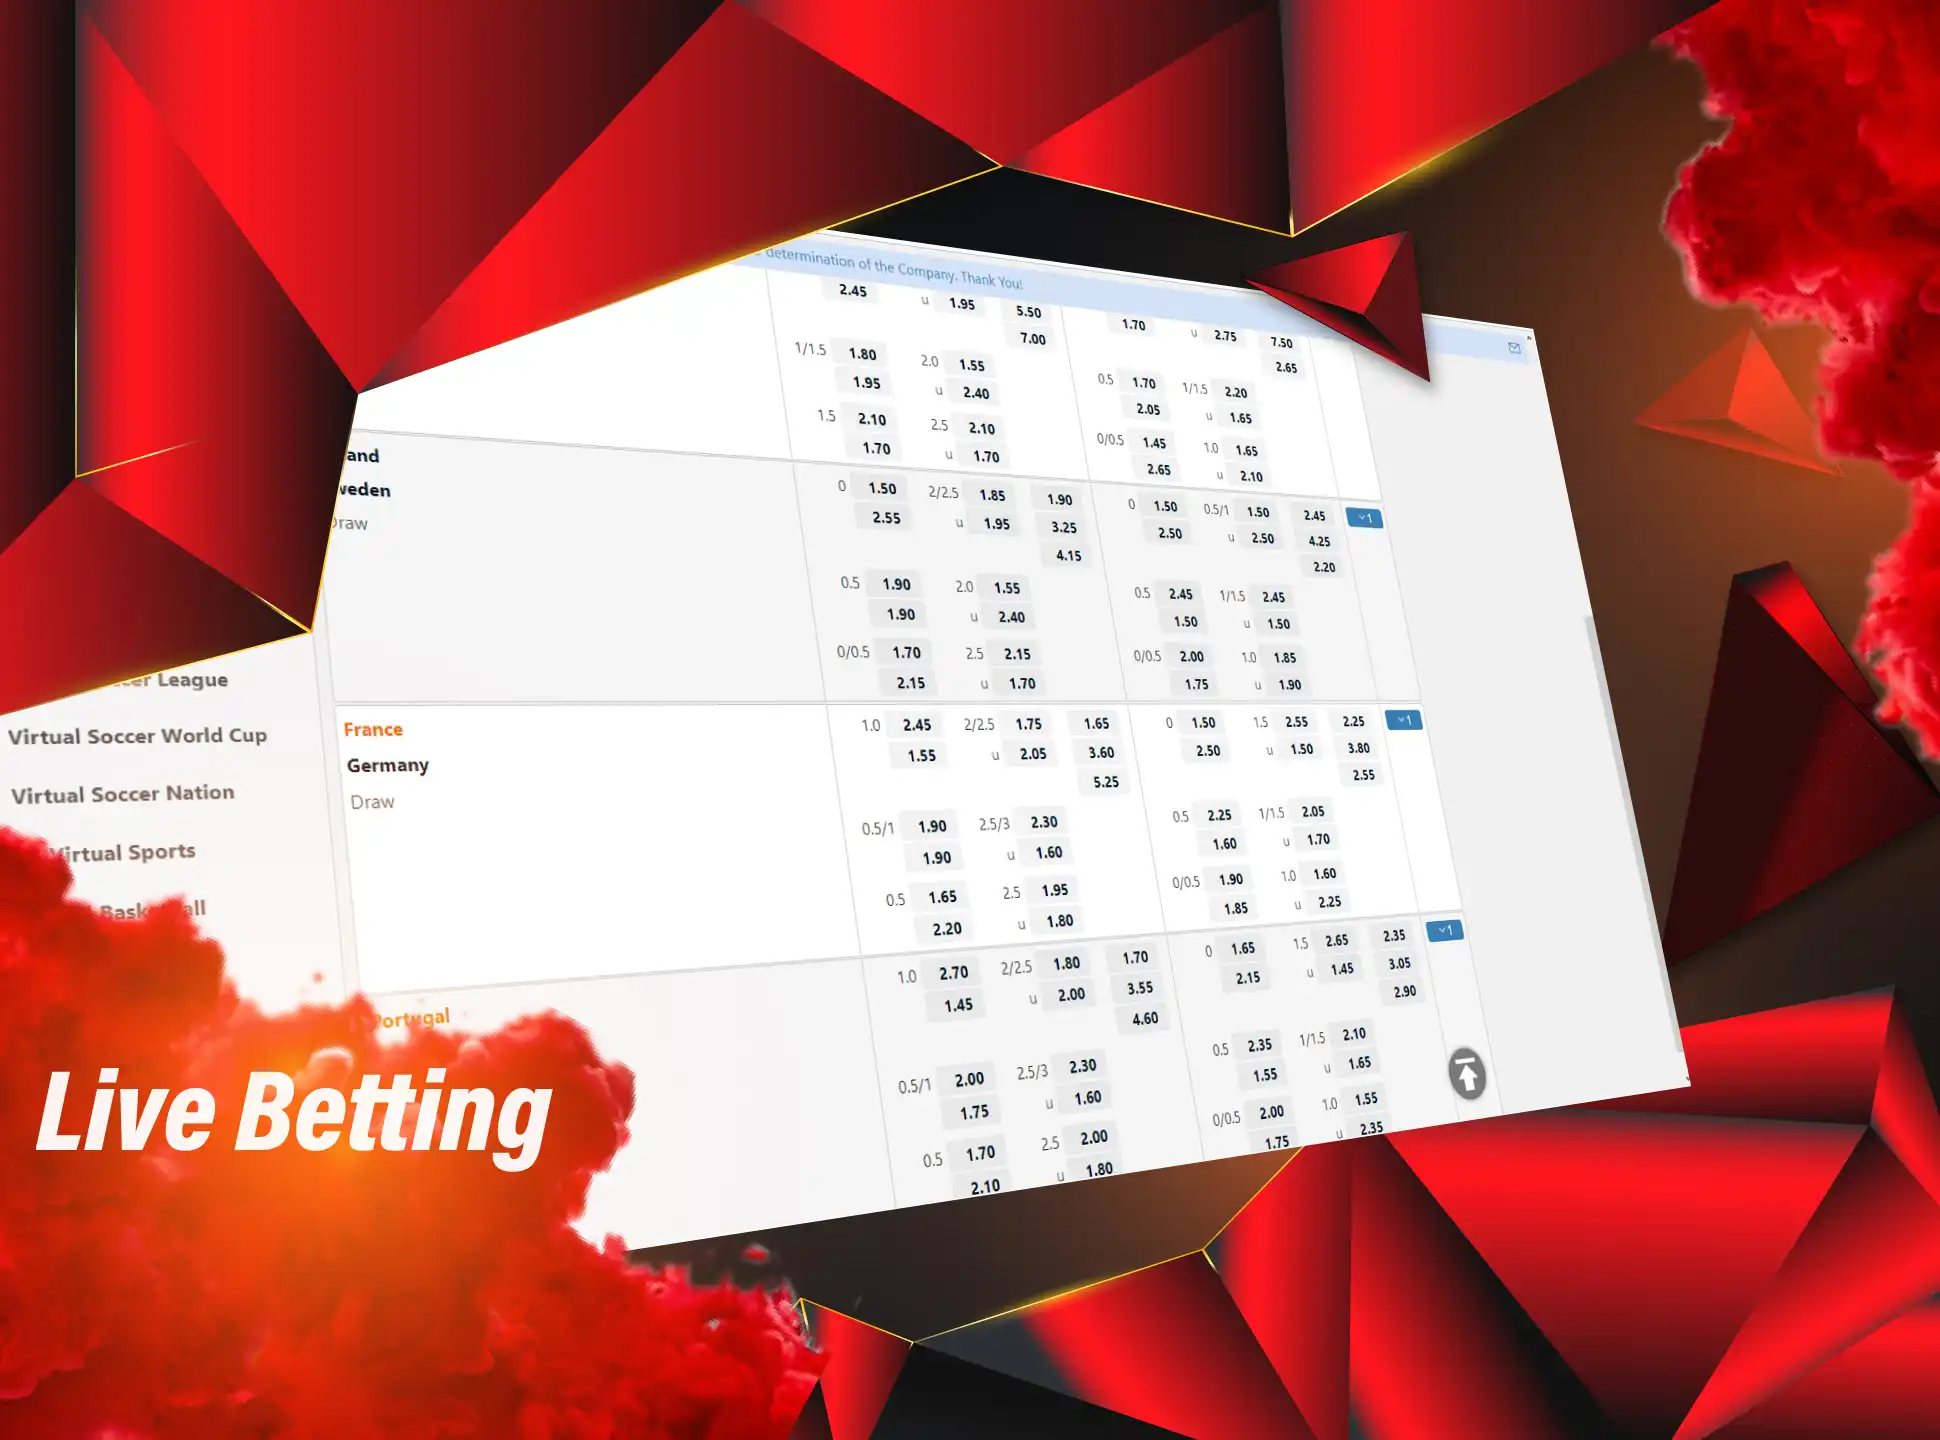 Watch the matches streamings at MarvelBet and place bets during the matches.